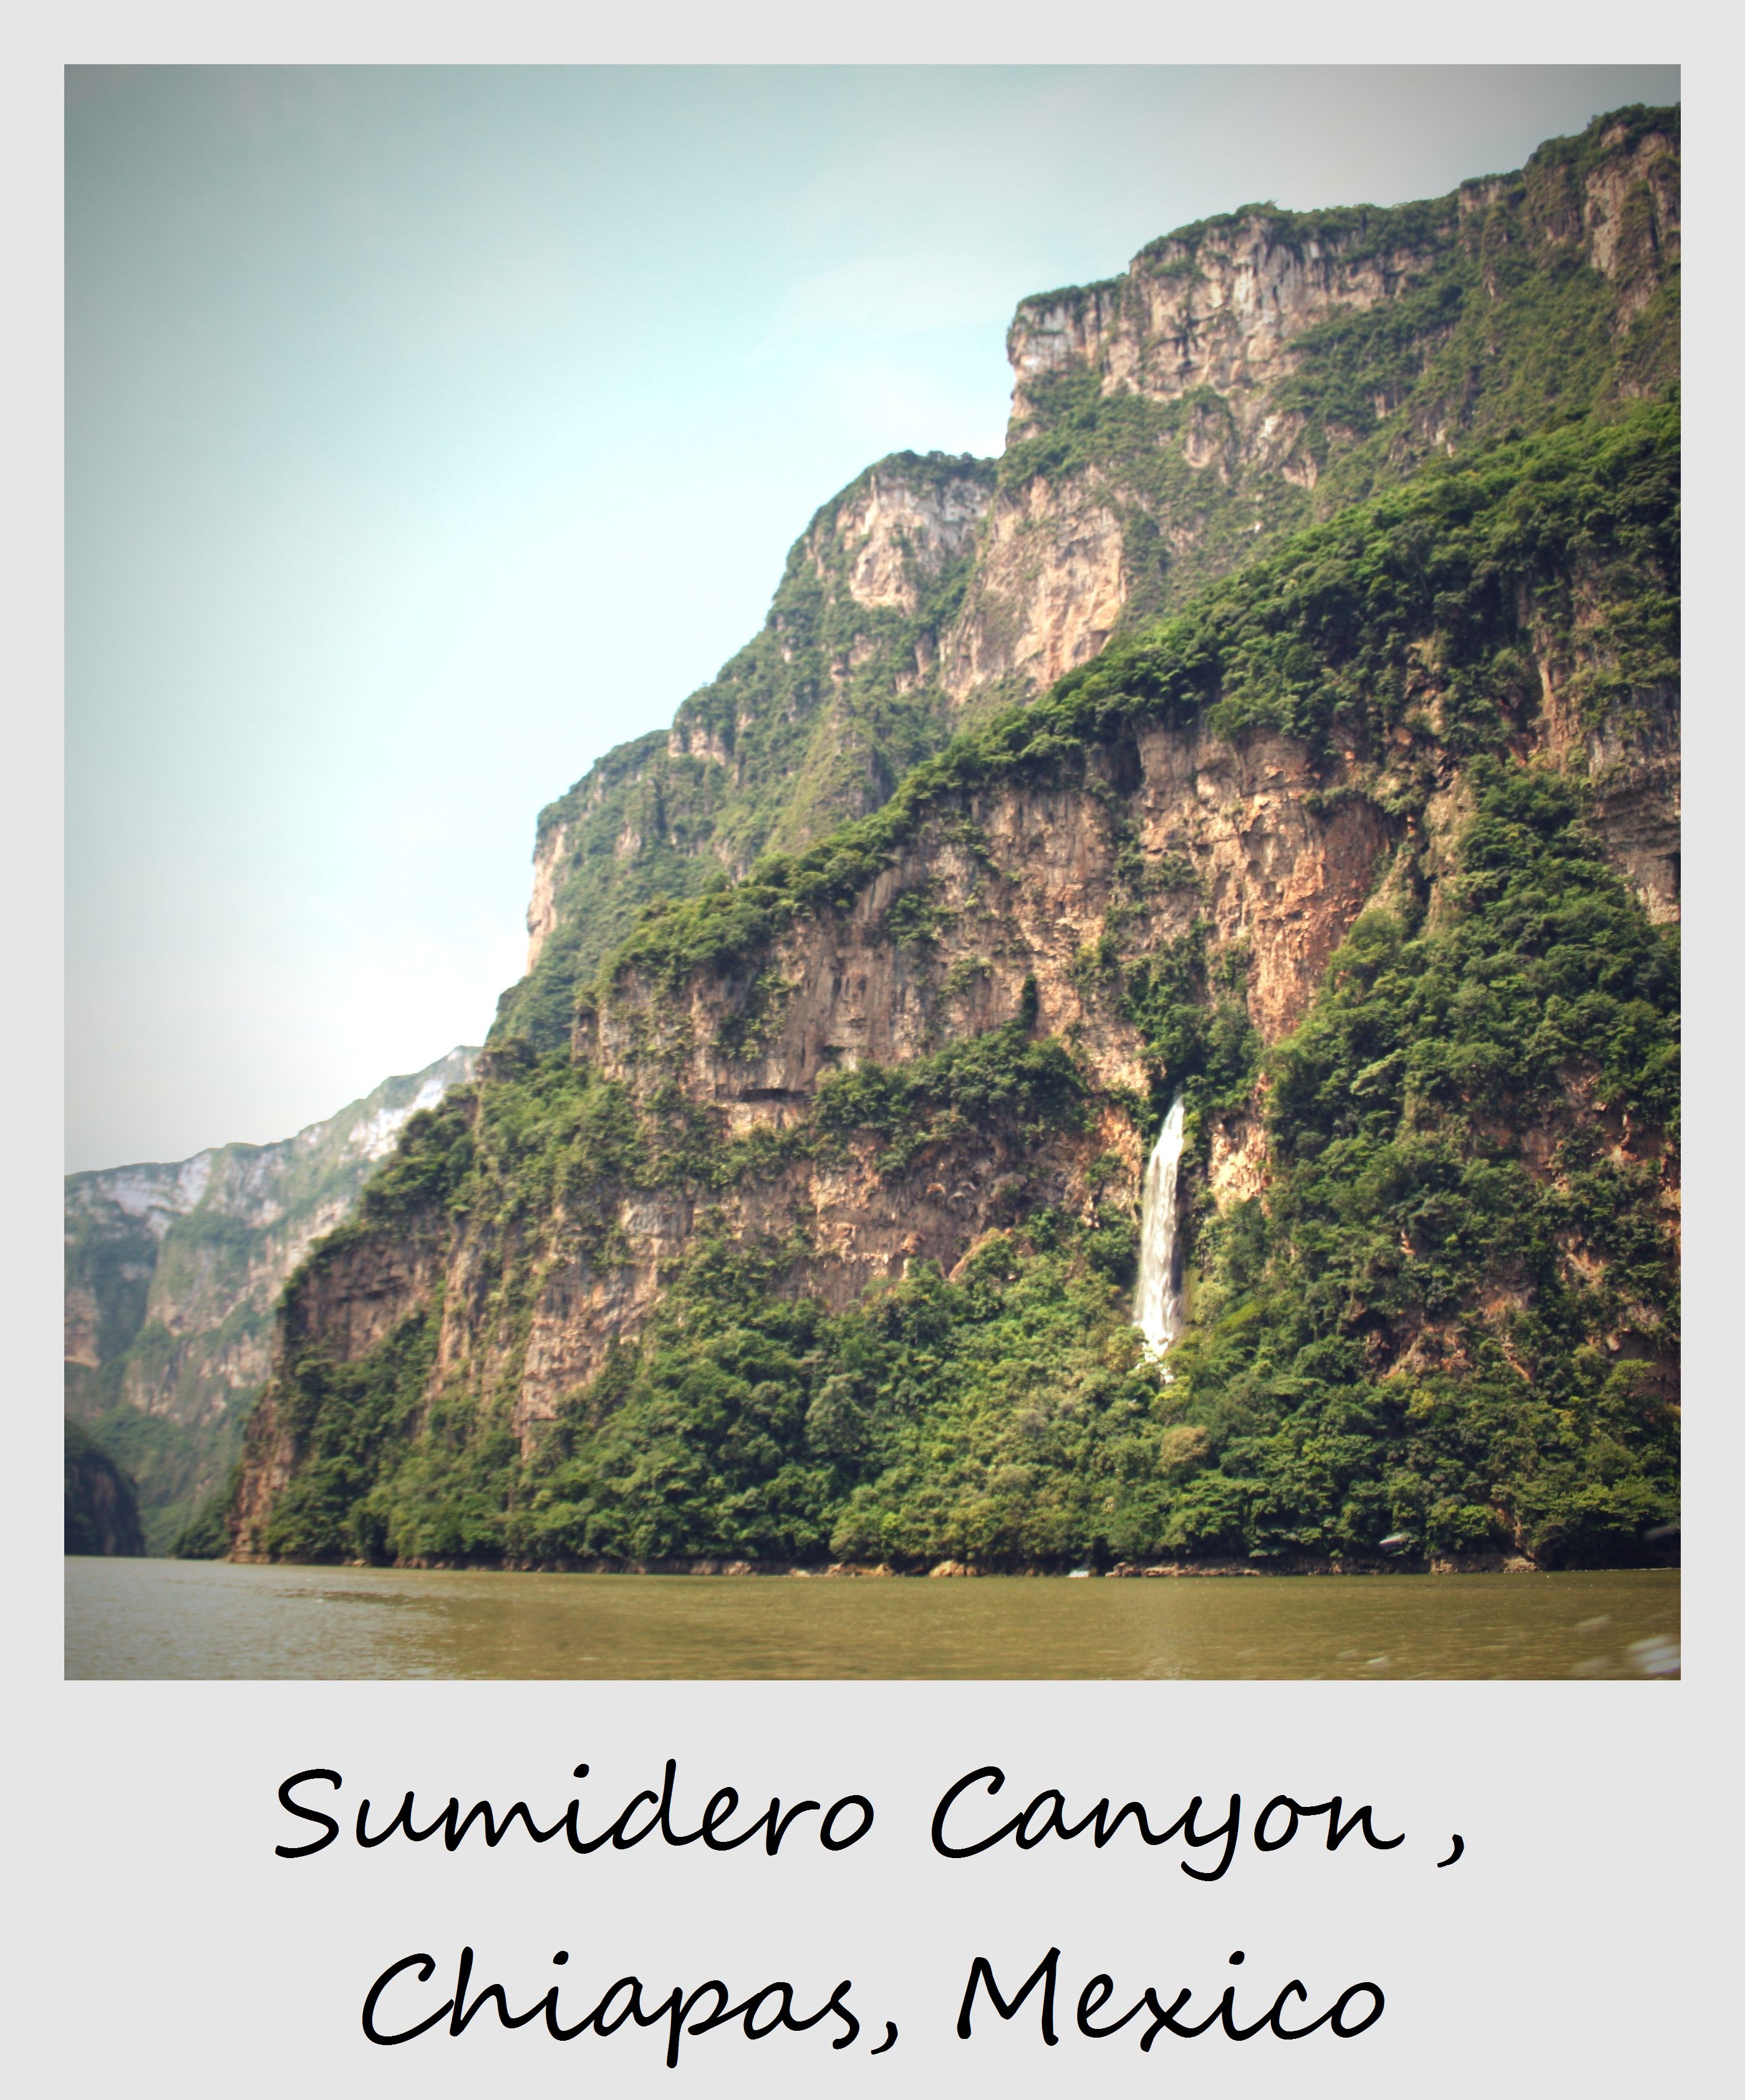 Sumidero Canyon: The Good, no bad, but some ugly